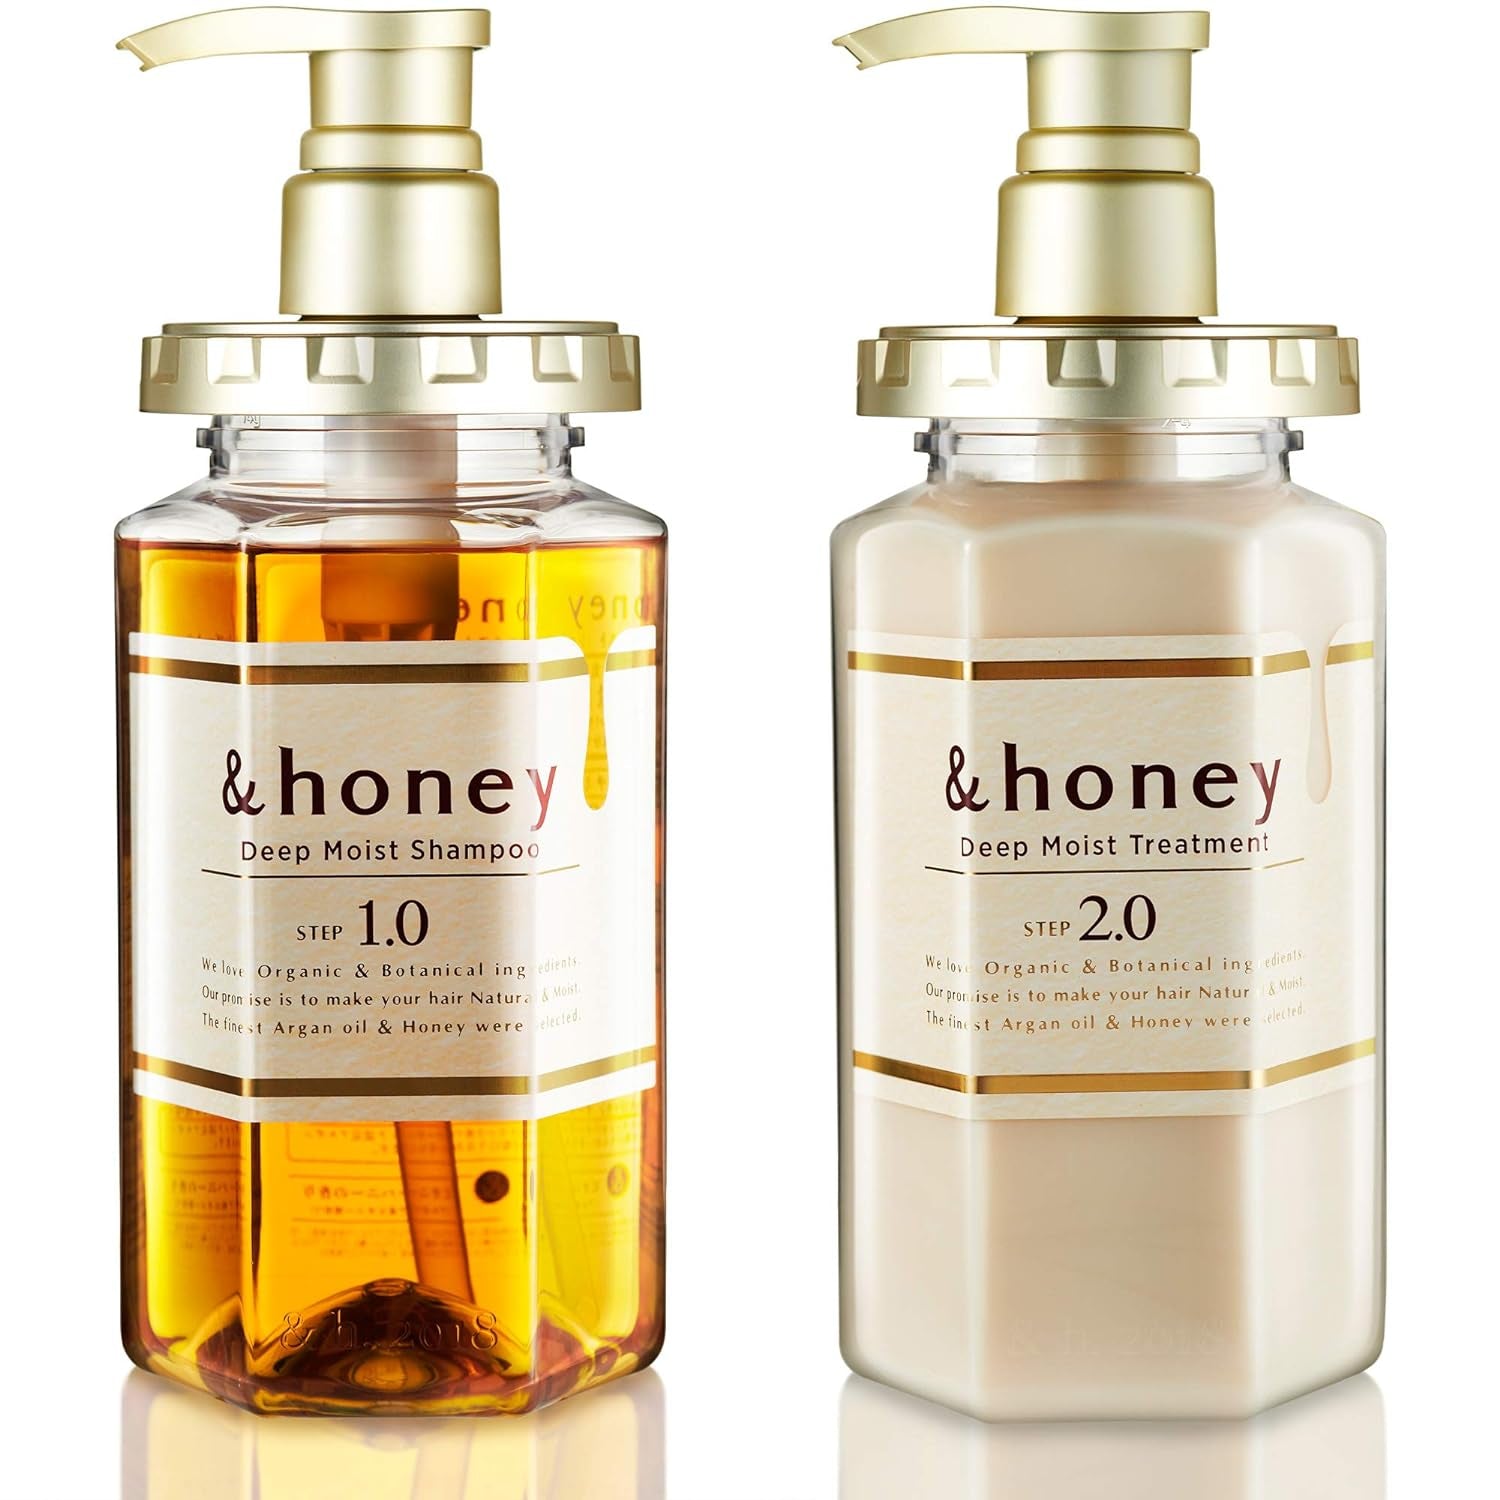 &Honey Shampoo & Conditioner Set Organic Hair and Scalp Care for Intense Cleansing and Hydration - Moisture-Enhancing Wash and Protection - Ideal for Straight, Curly, Curl, Kinky, Frizzy, Treated, Col